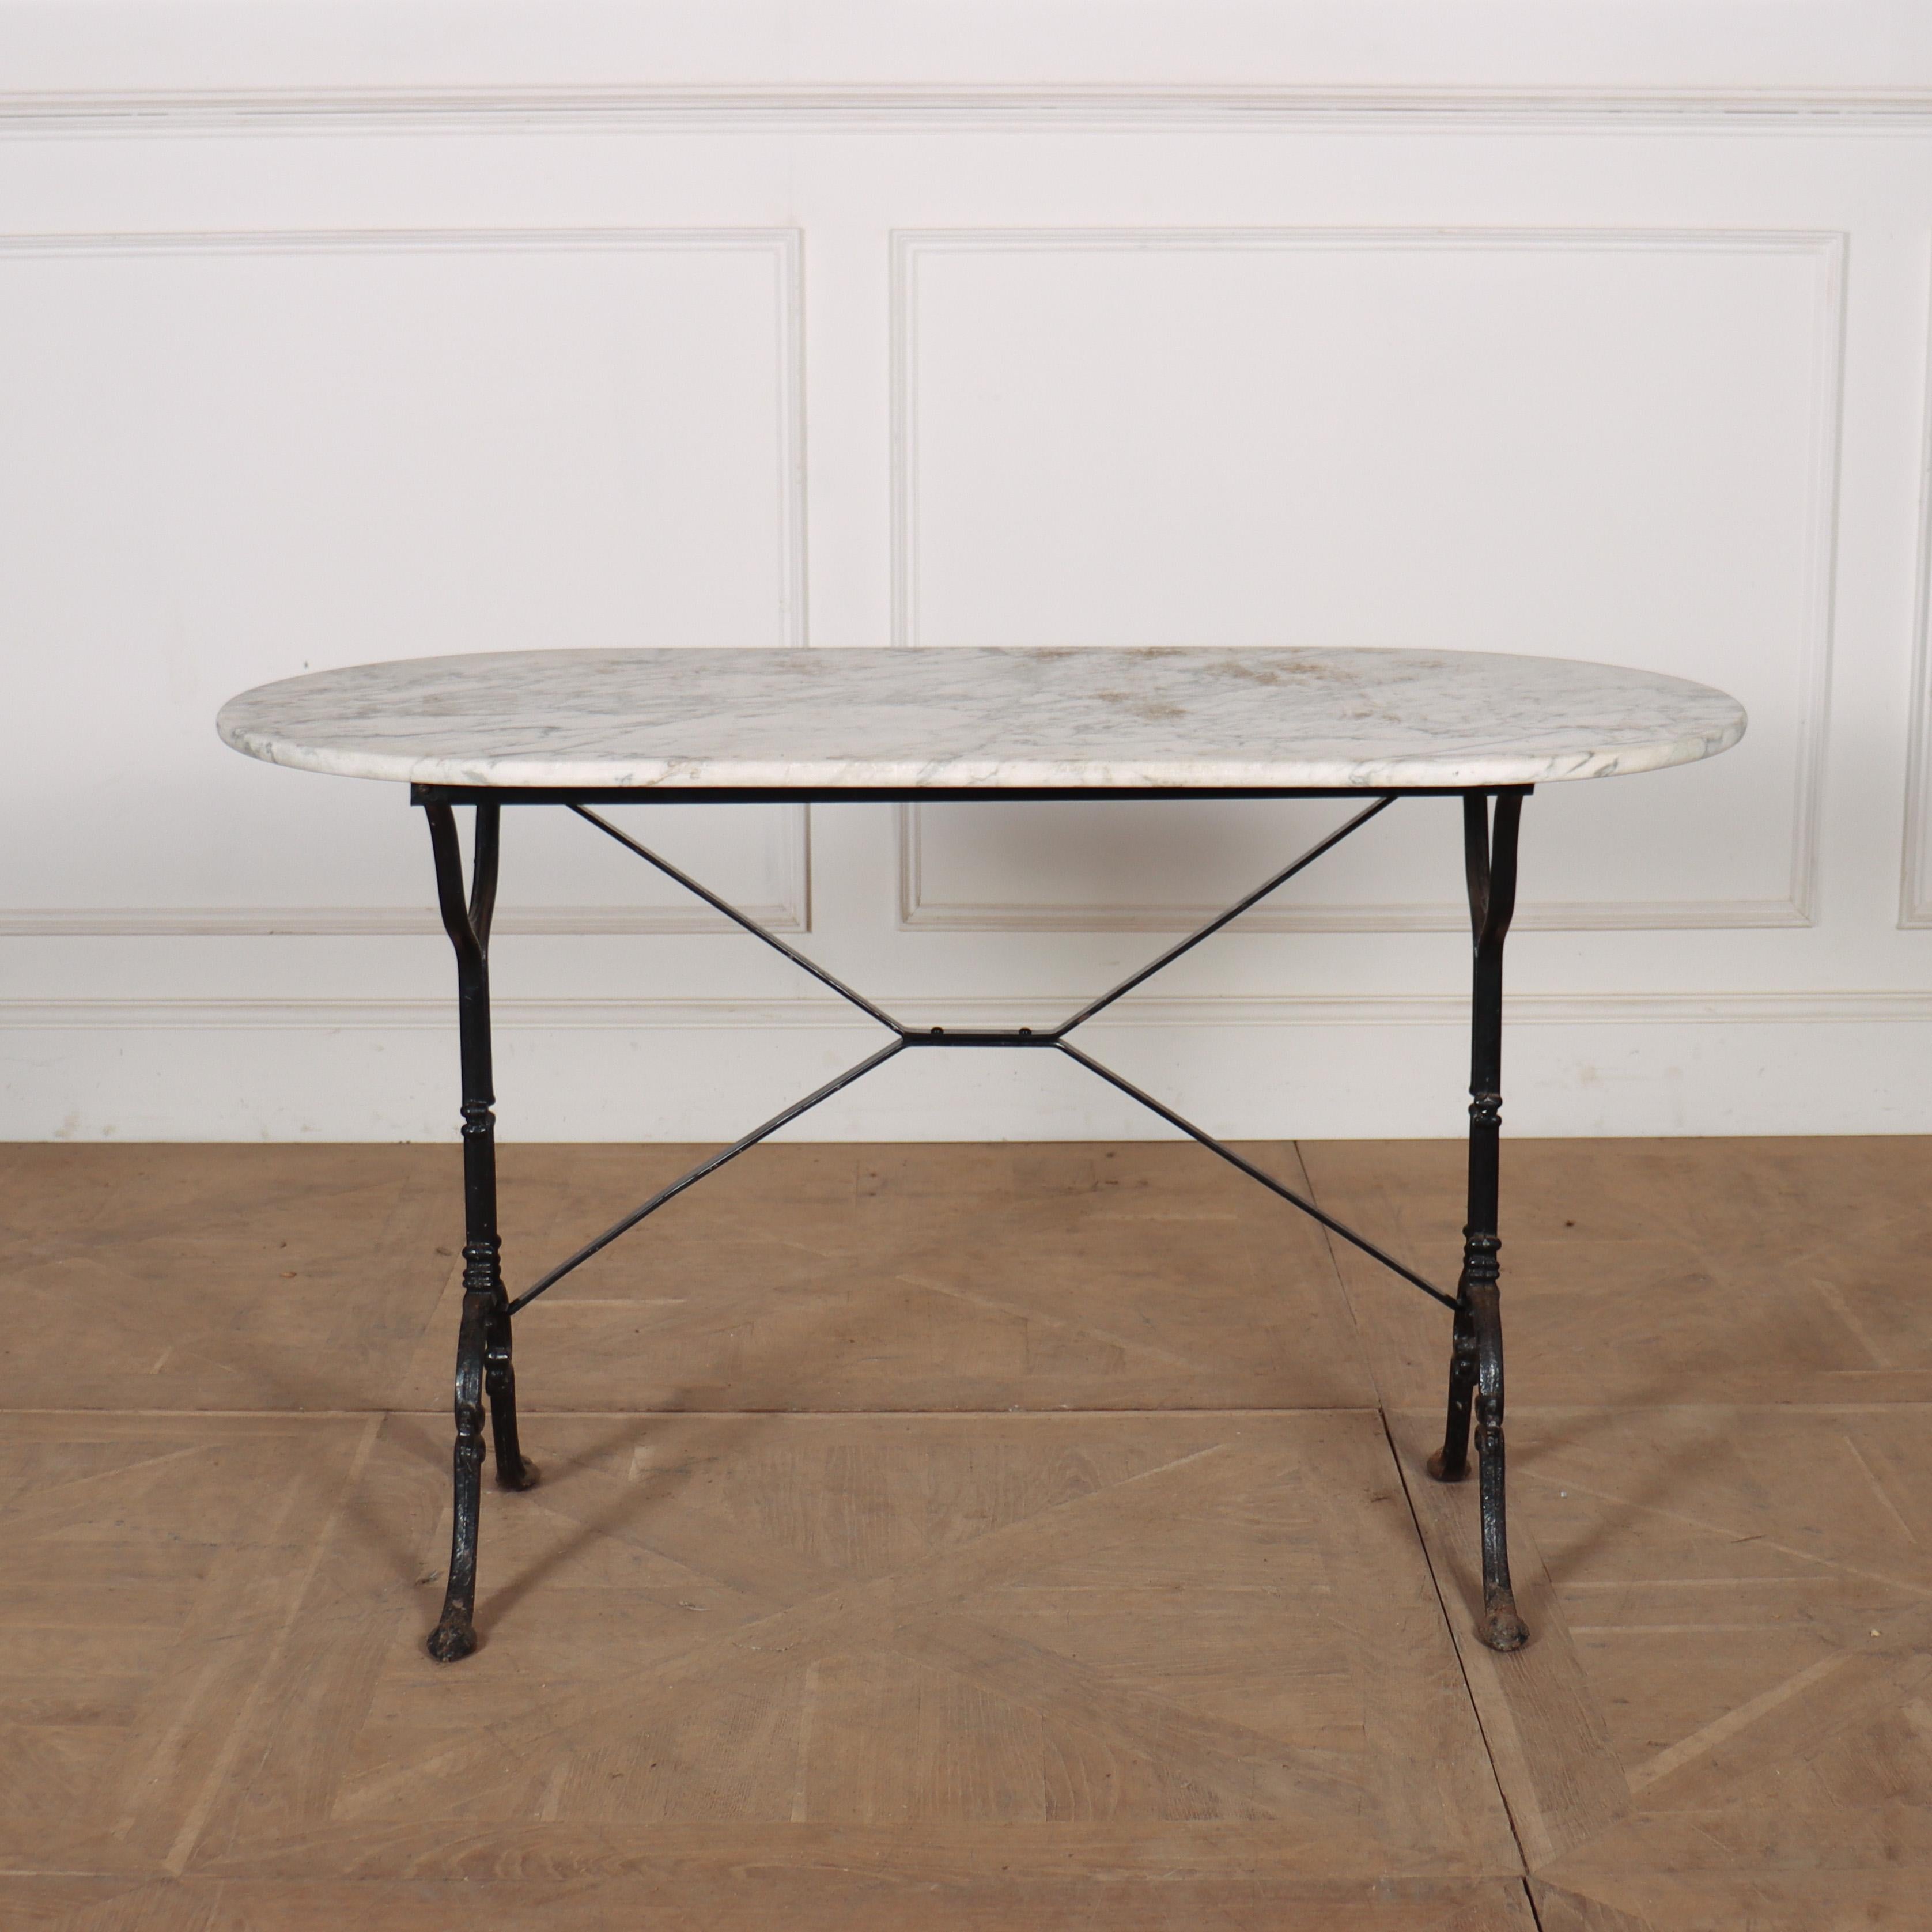 Early 20th C French bistro table with a marble top on iron legs. 1920.

Reference: 8124

Dimensions
47.5 inches (121 cms) Wide
23.5 inches (60 cms) Deep
28 inches (71 cms) High